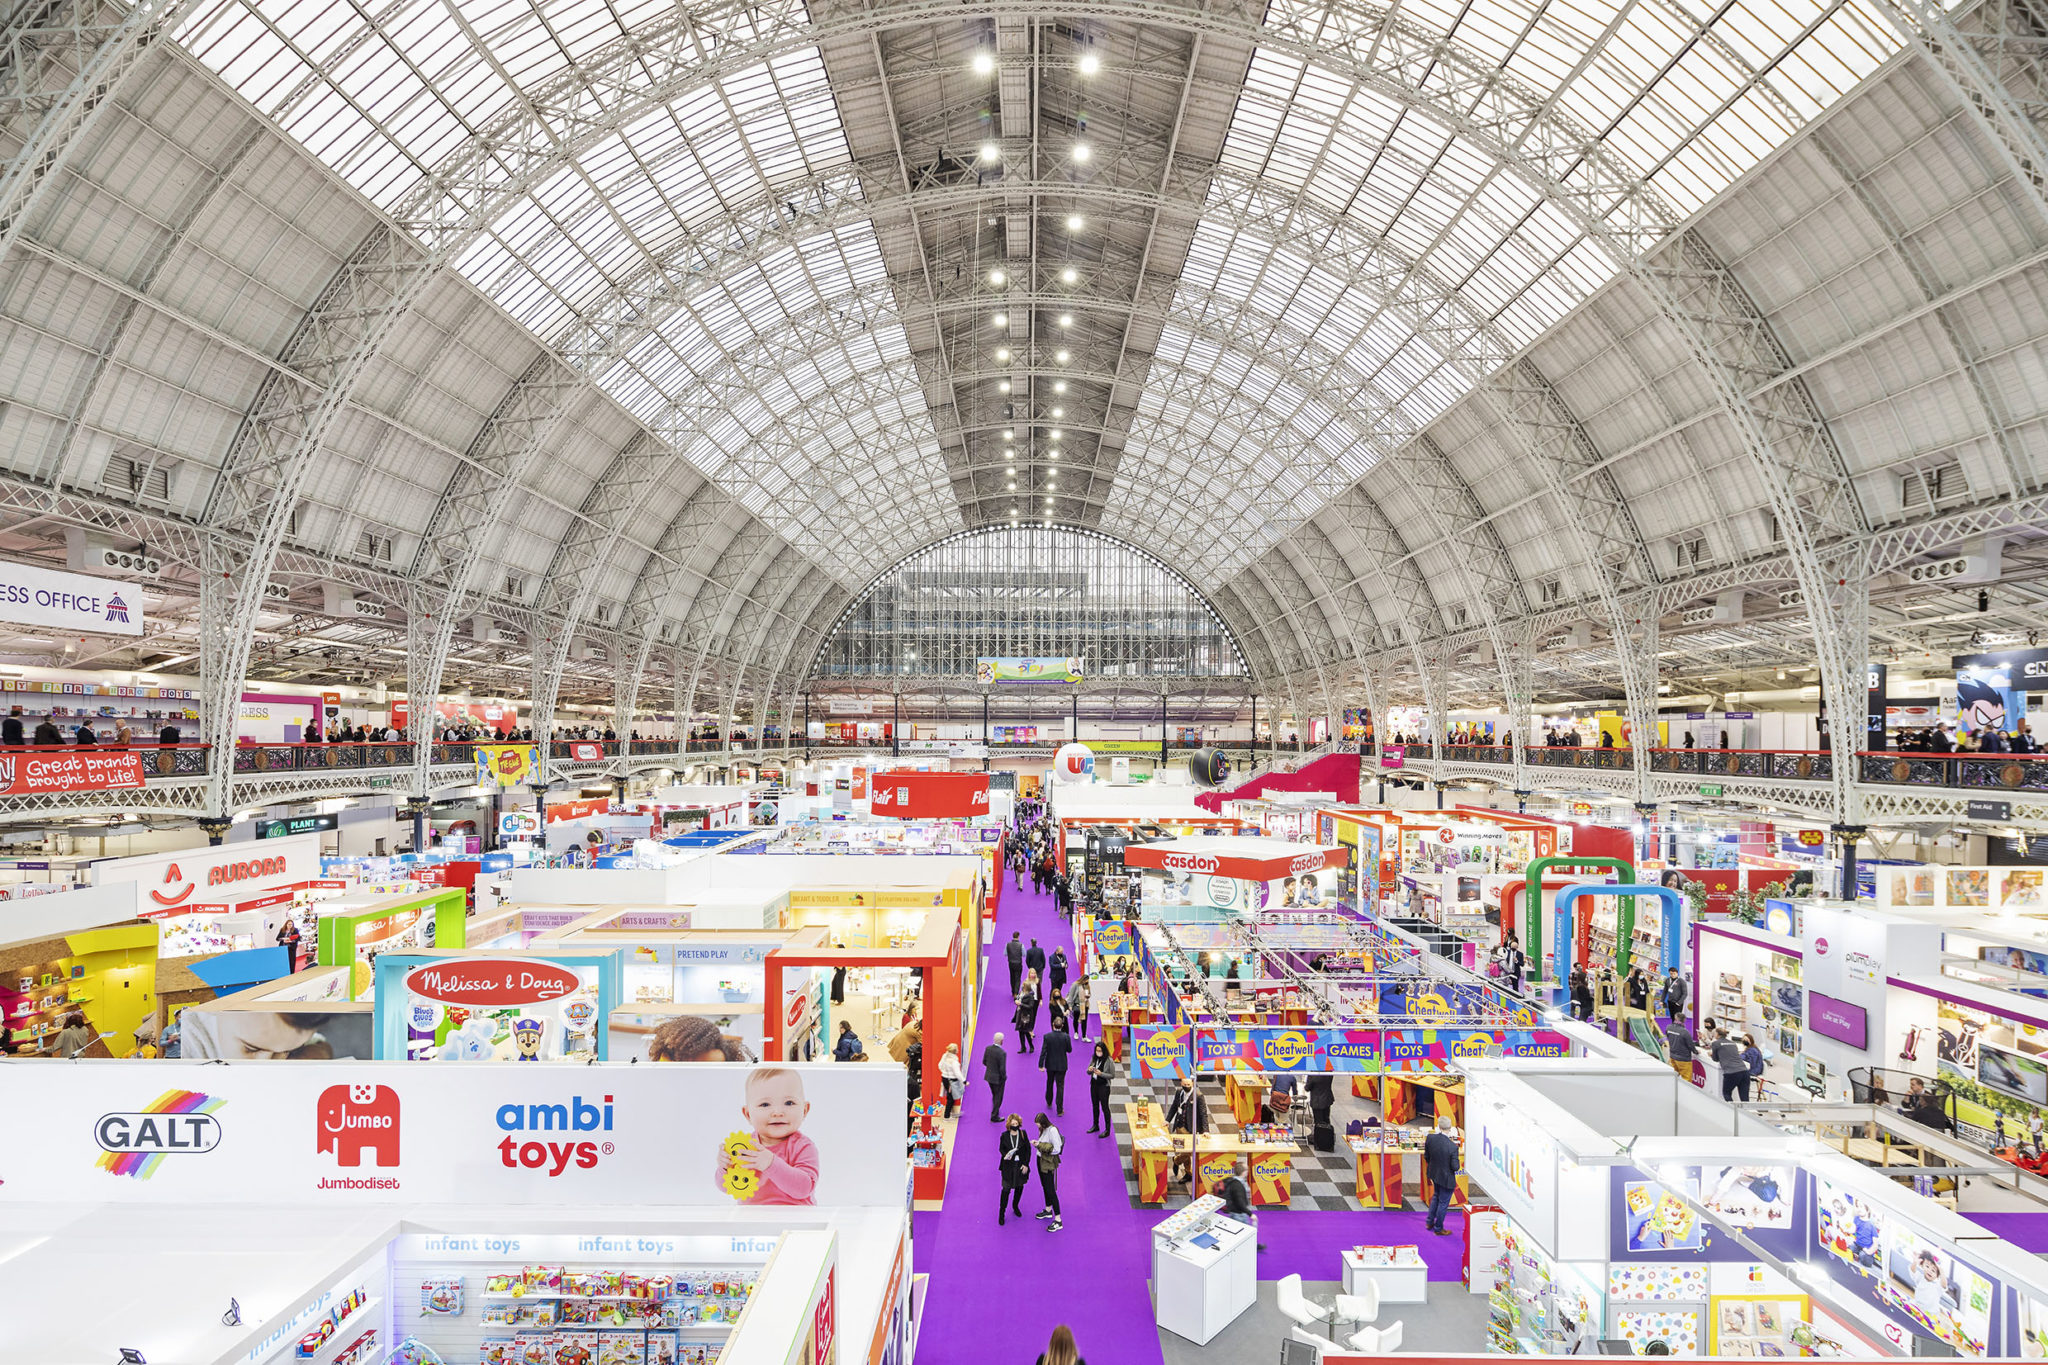 London Toy Fair returns with a successful show Toy World Magazine